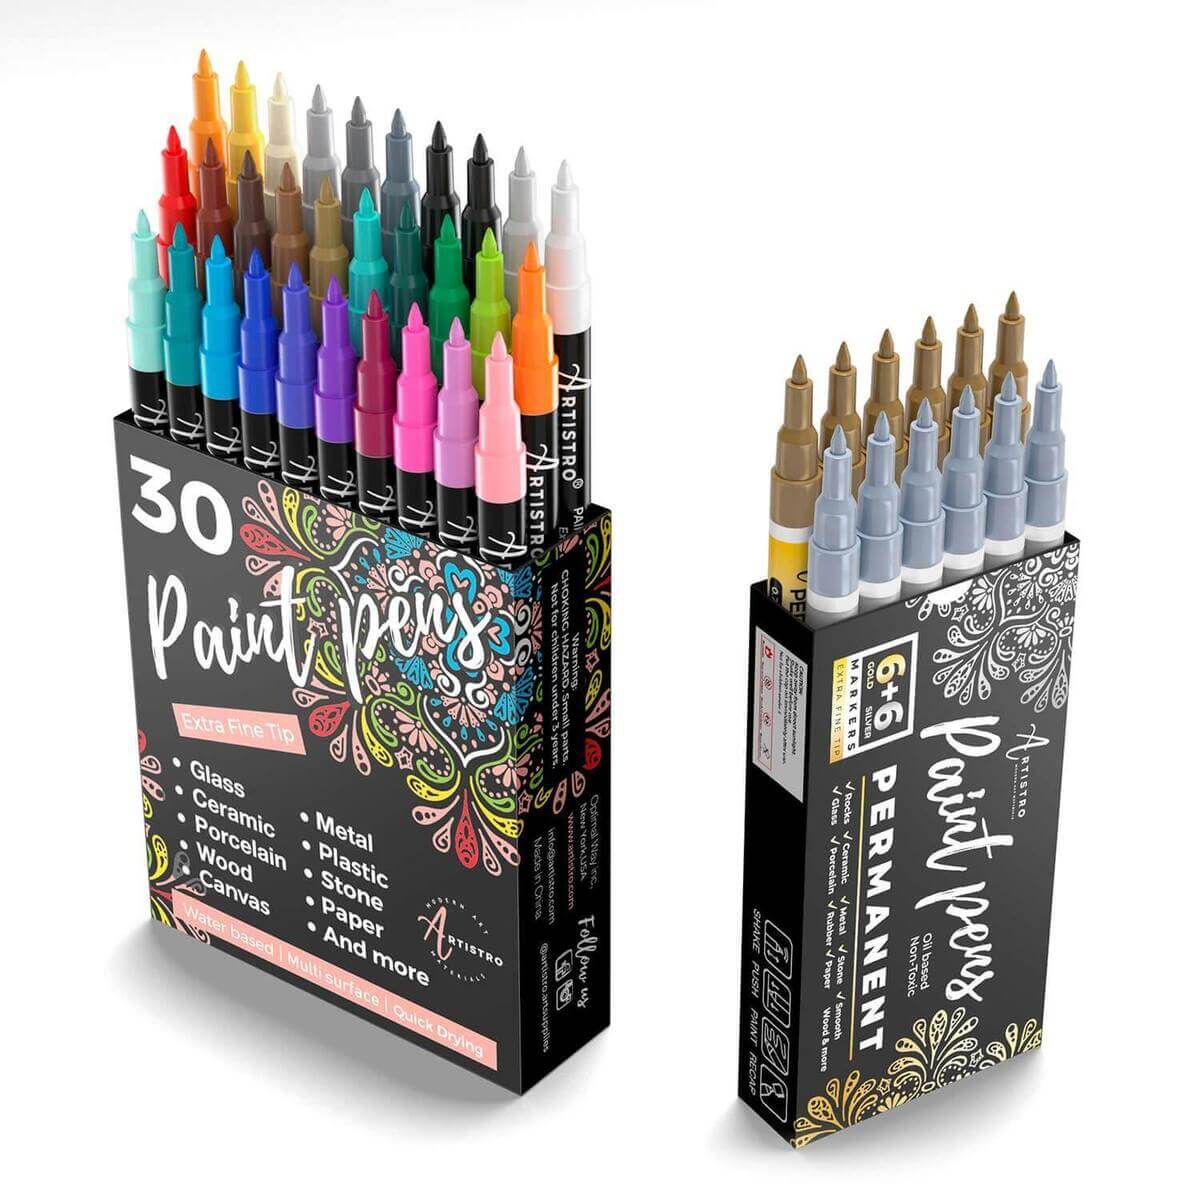 Artistro Acrylic Paint Pens - Product Review 